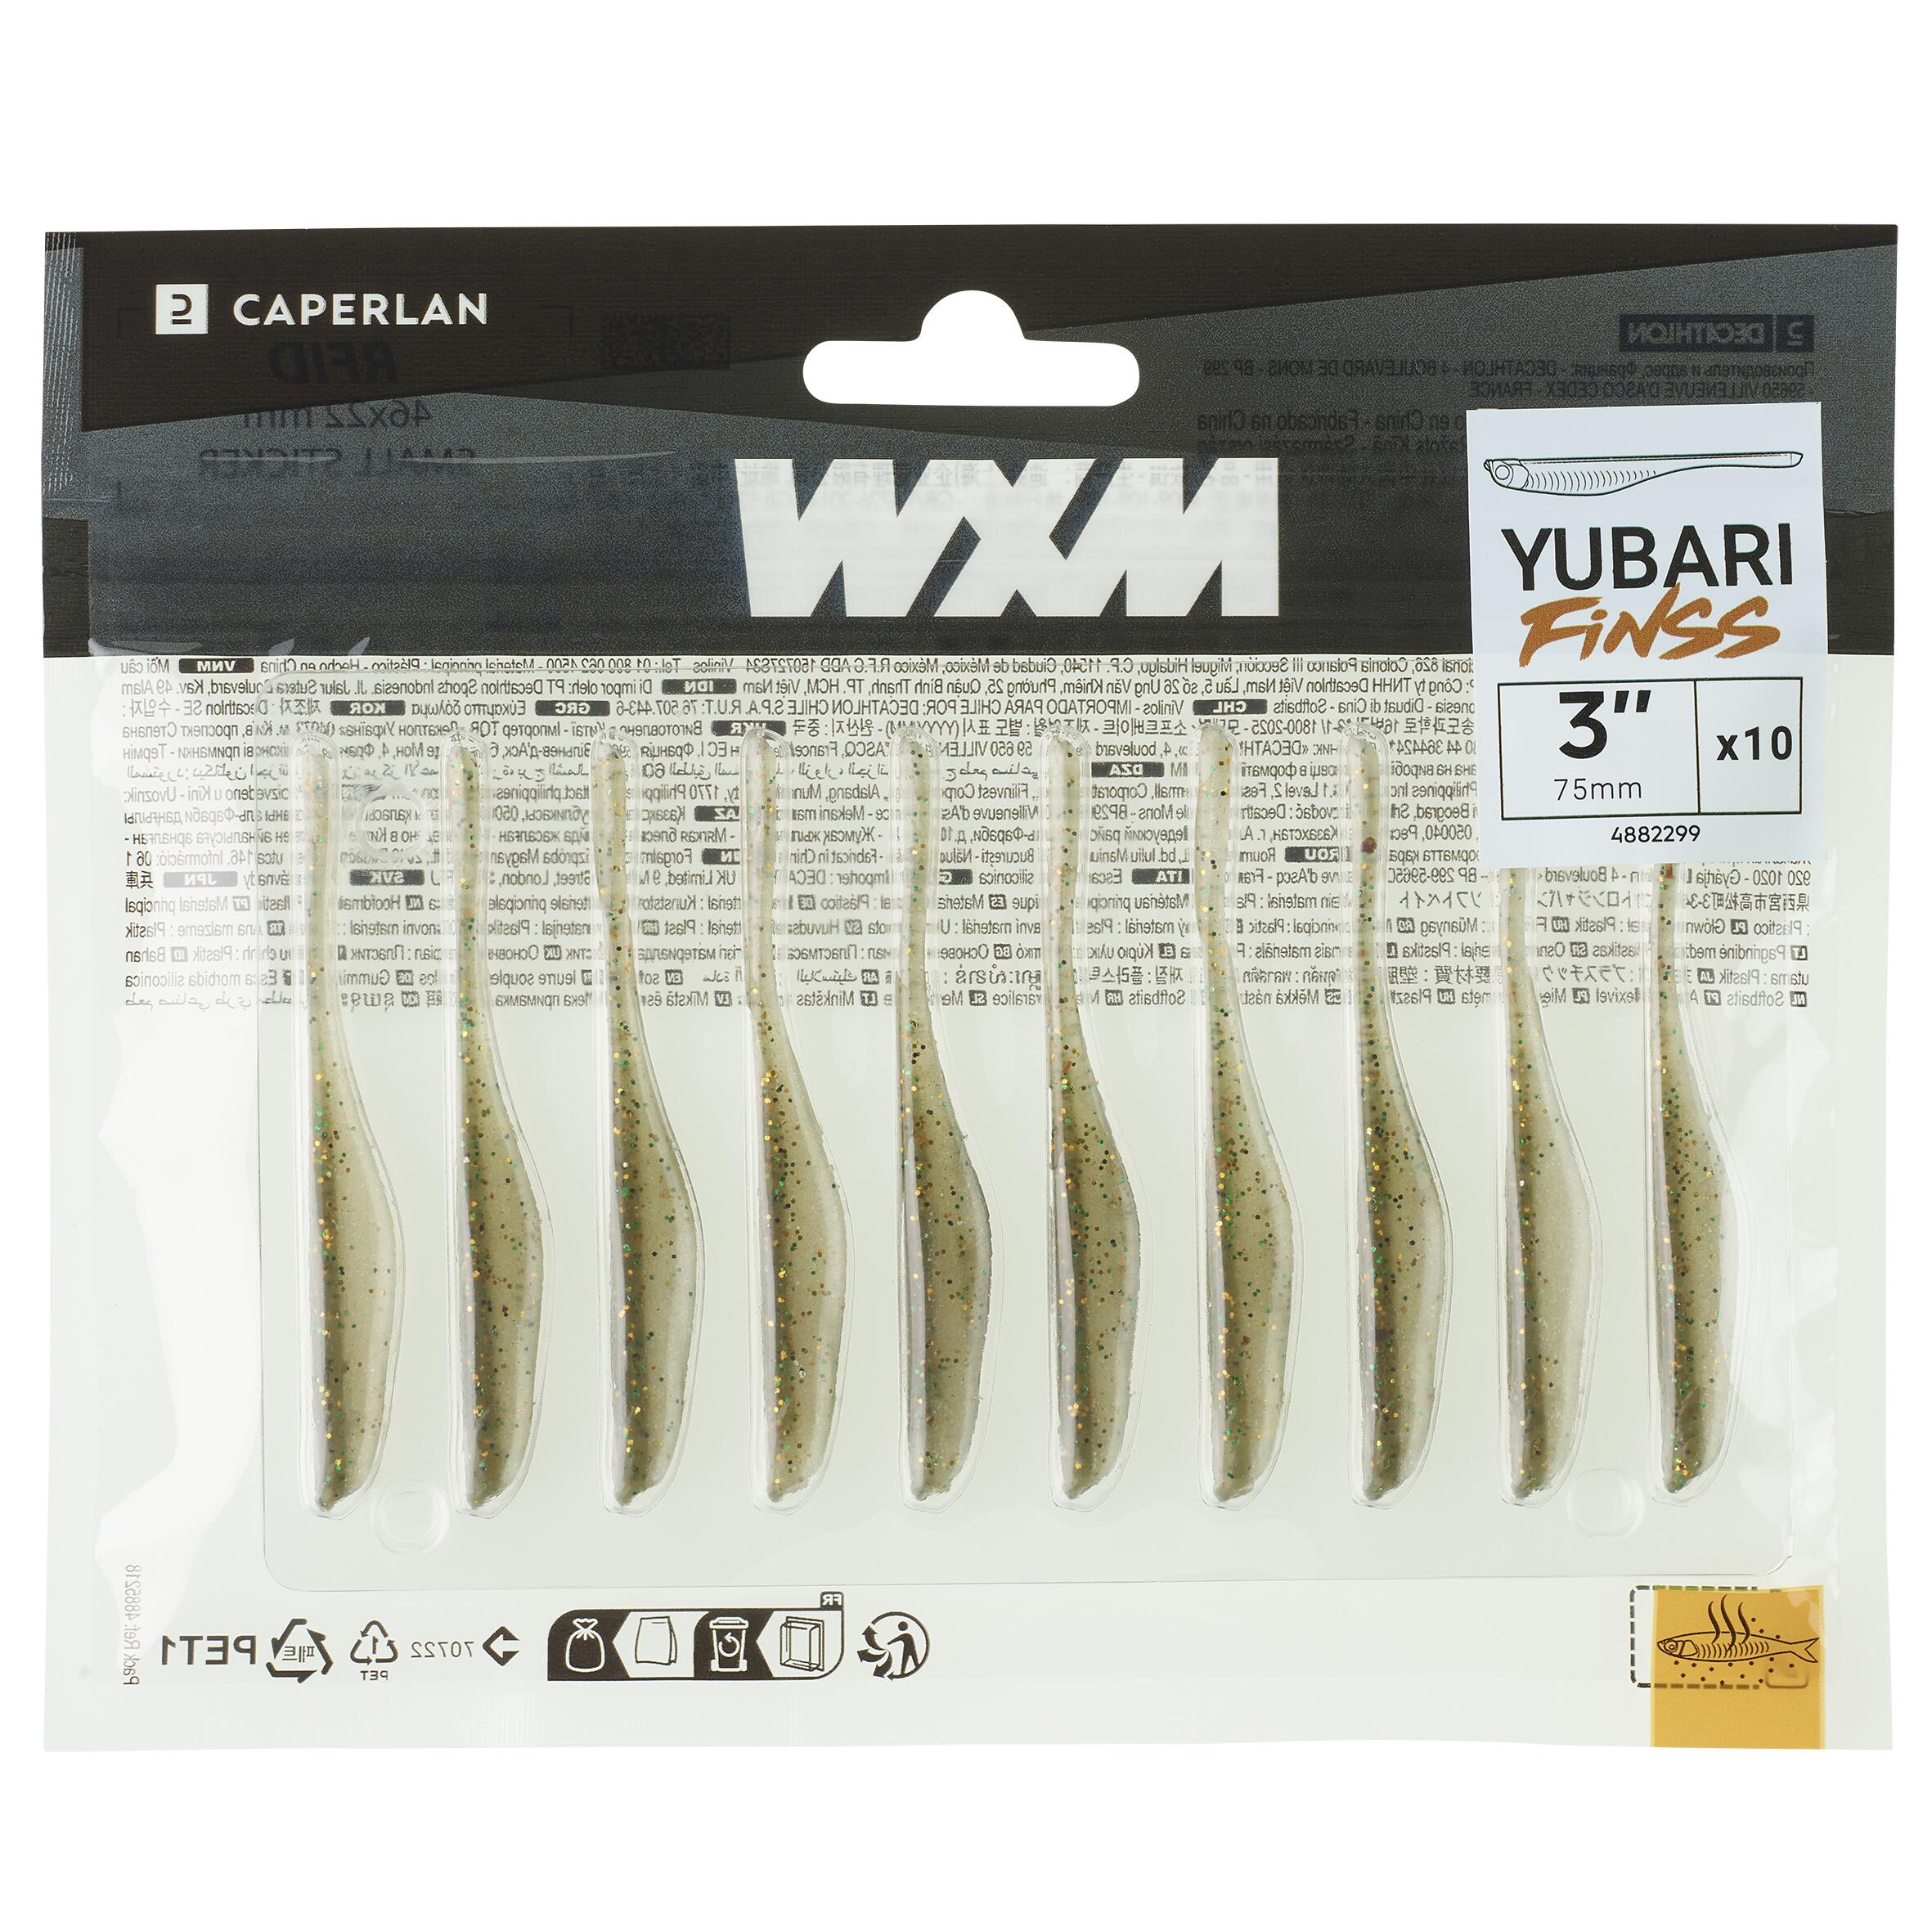 FINESS AVEC SOFT LURE WITH WXM YUBARI FINSS 75 ATTRACTANT GREEN 4/7